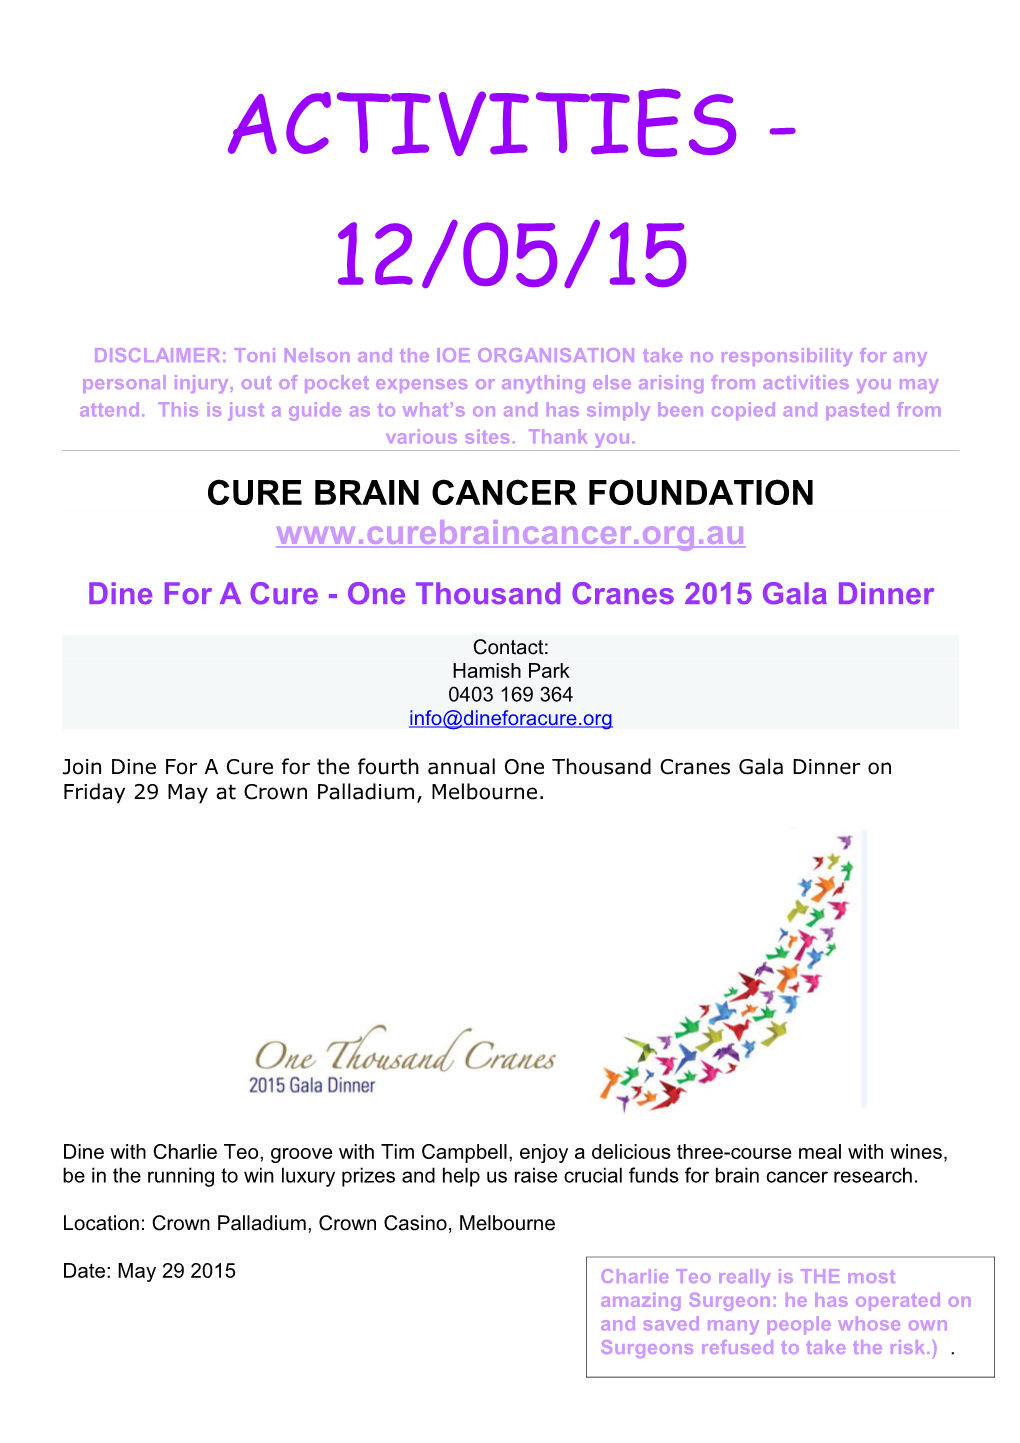 Dine for a Cure - One Thousand Cranes 2015 Gala Dinner